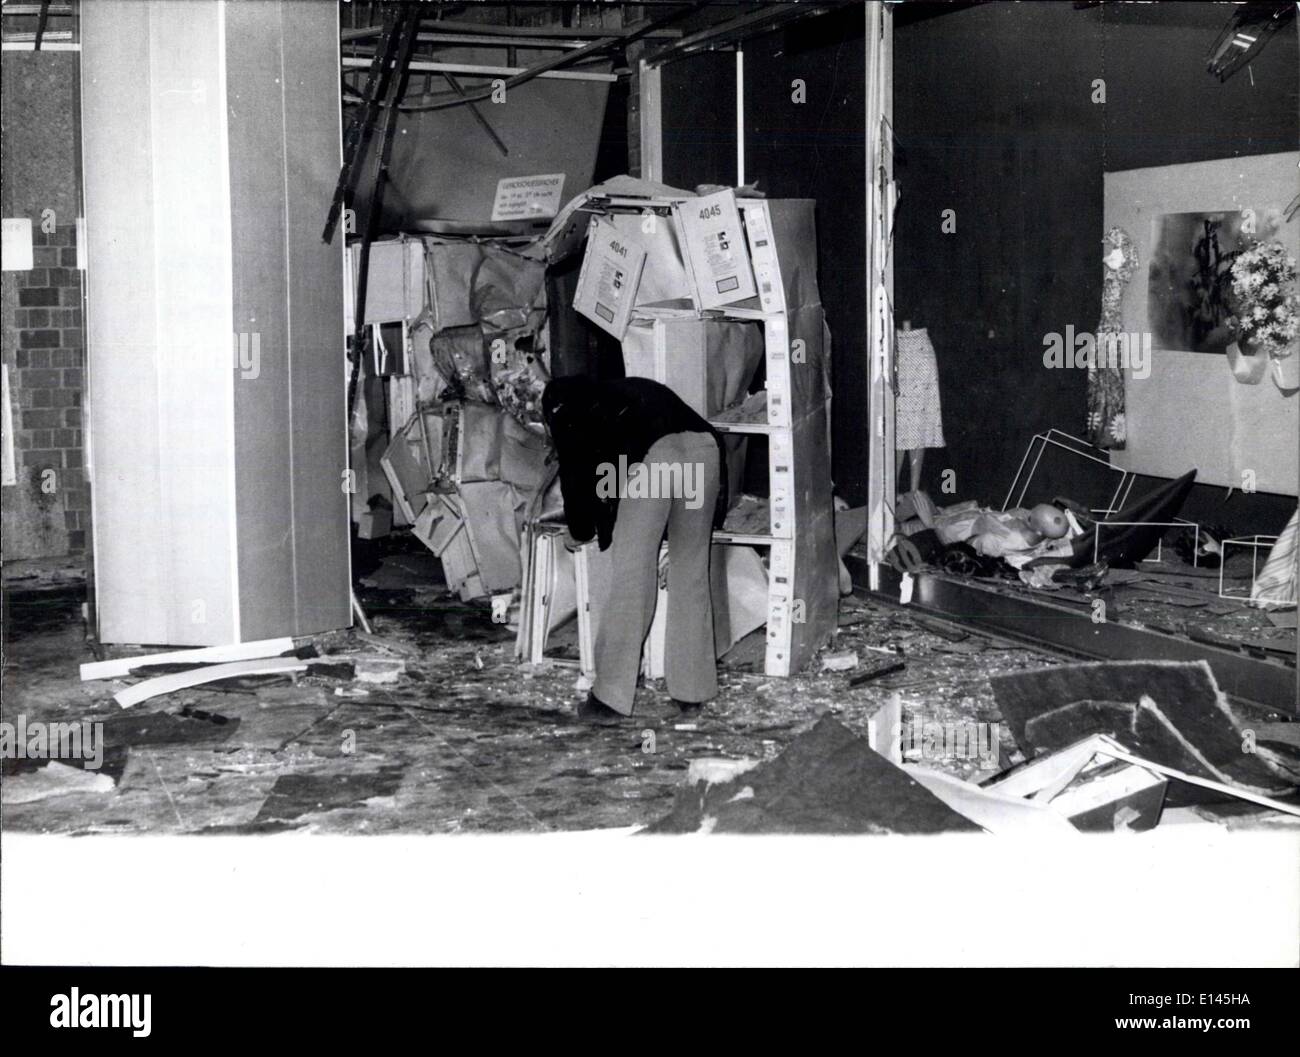 Apr. 04, 2012 - Bomb attempt in Centre of Munich: In the main subway station of Munich, the Stachus, a bomb exploded in one of the luggage lockers in the night of May 14th, 1976. The explosion brought down the ceiling of about 1200 square metres and many windows of nearby shops were smashed. No persons were injured. The police assume, that the bomb attempt is connected with the death of leader Ulrike Meinhof of the ''baader/Meinhof Group'', who had committed suicide in prison on May 9th. Photo shows a police officer searching the contents of the wrecked luggage lockers. Stock Photo